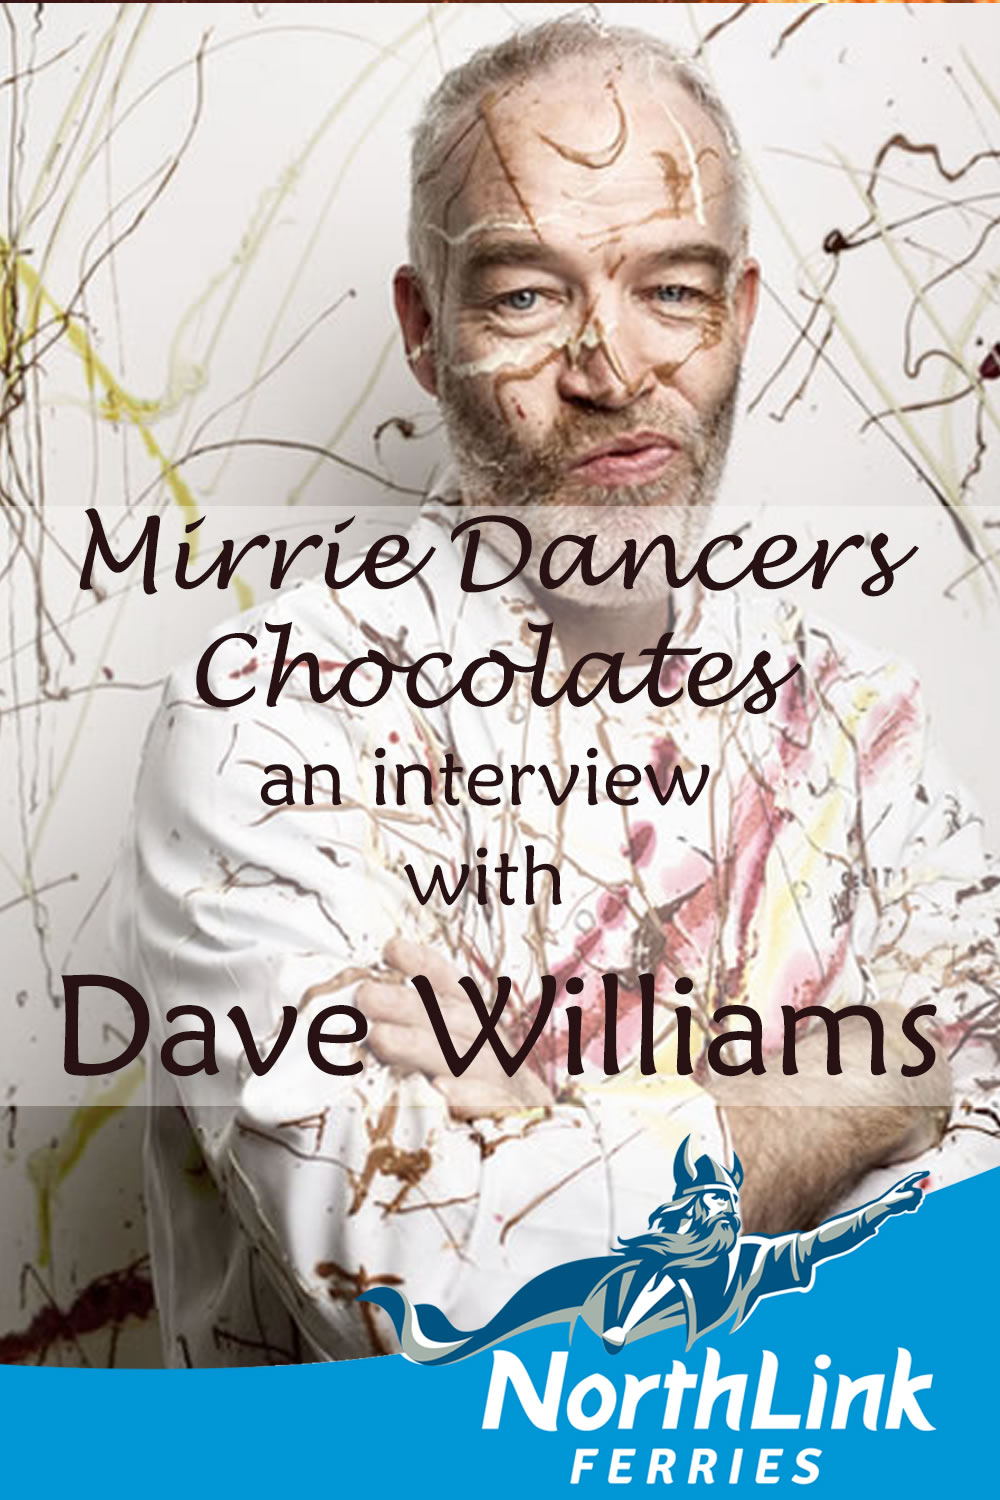 Mirrie Dancers Chocolates - an interview with Dave Williams